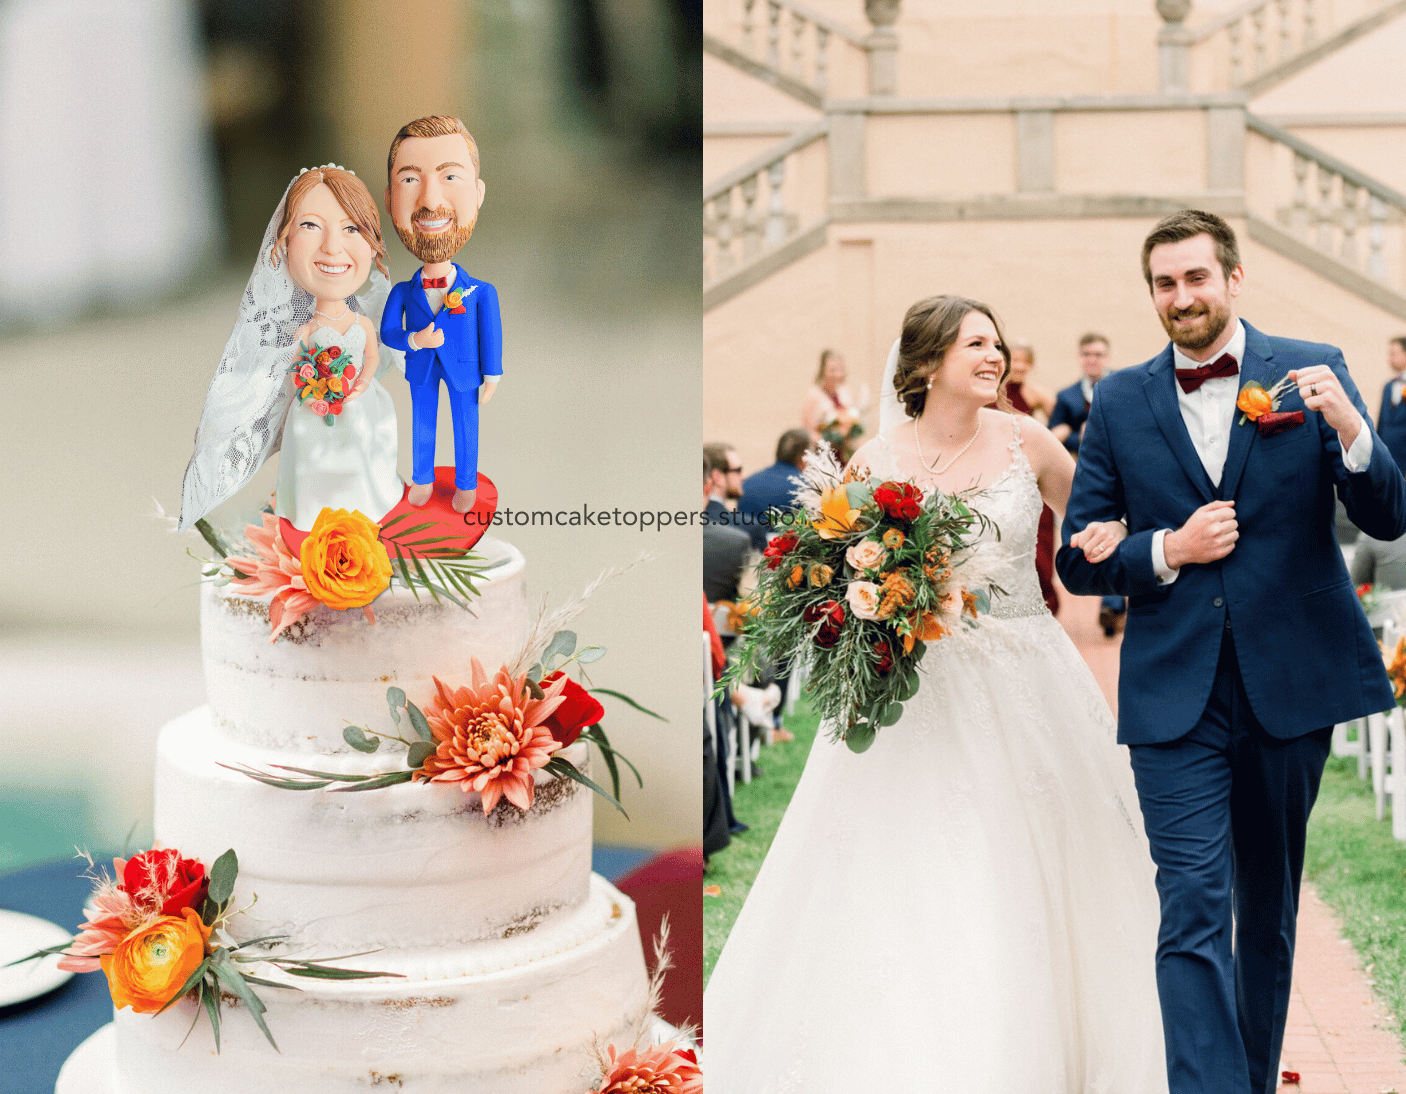 Personalised Wedding Cake Topper of couple